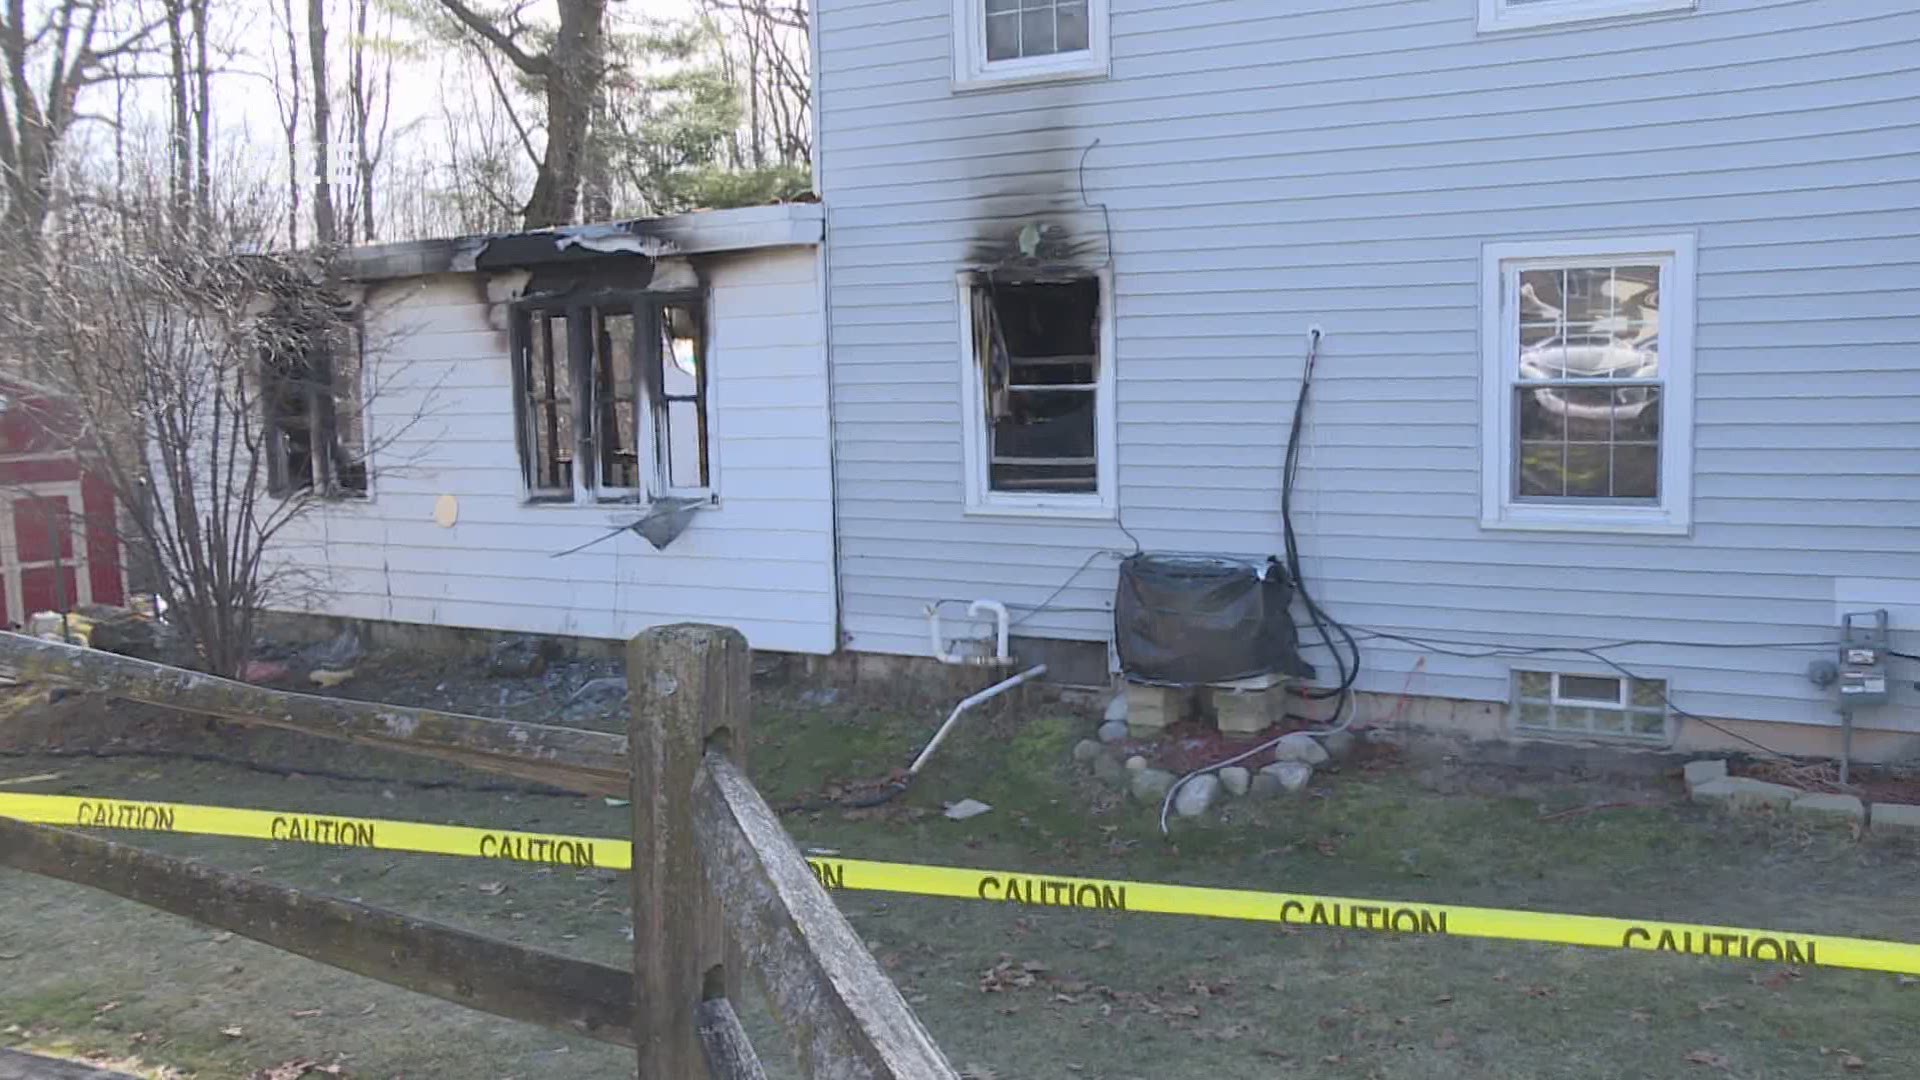 A man has been charged in a Grand Rapids house fire that killed a mother and three children in early February.